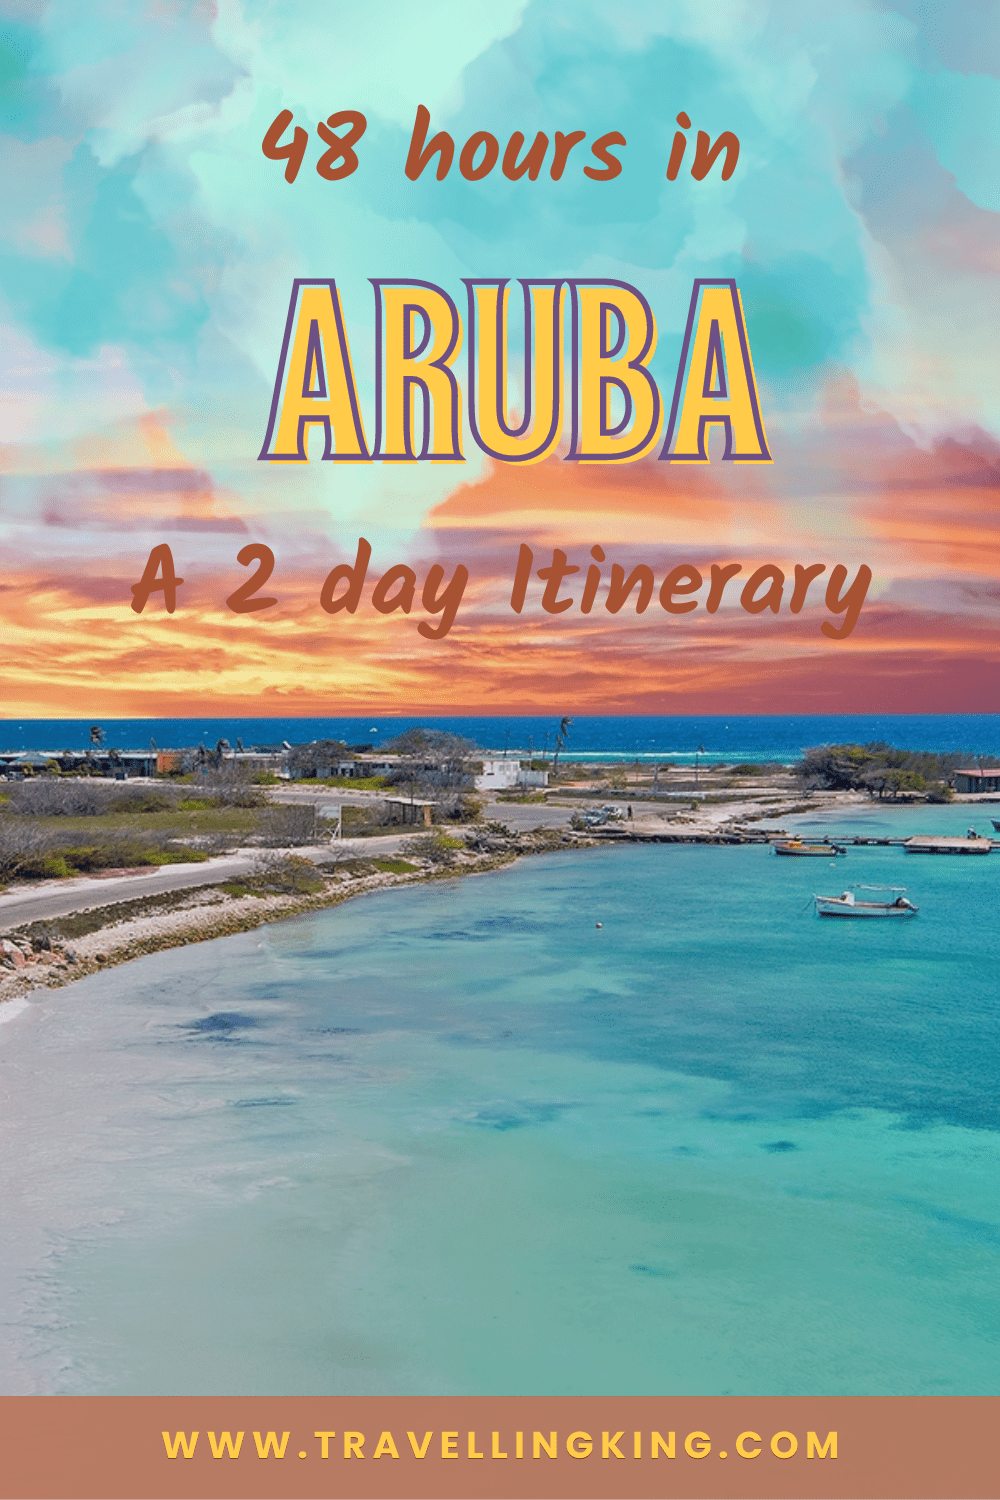 48 hours in Aruba - A 2 day Itinerary